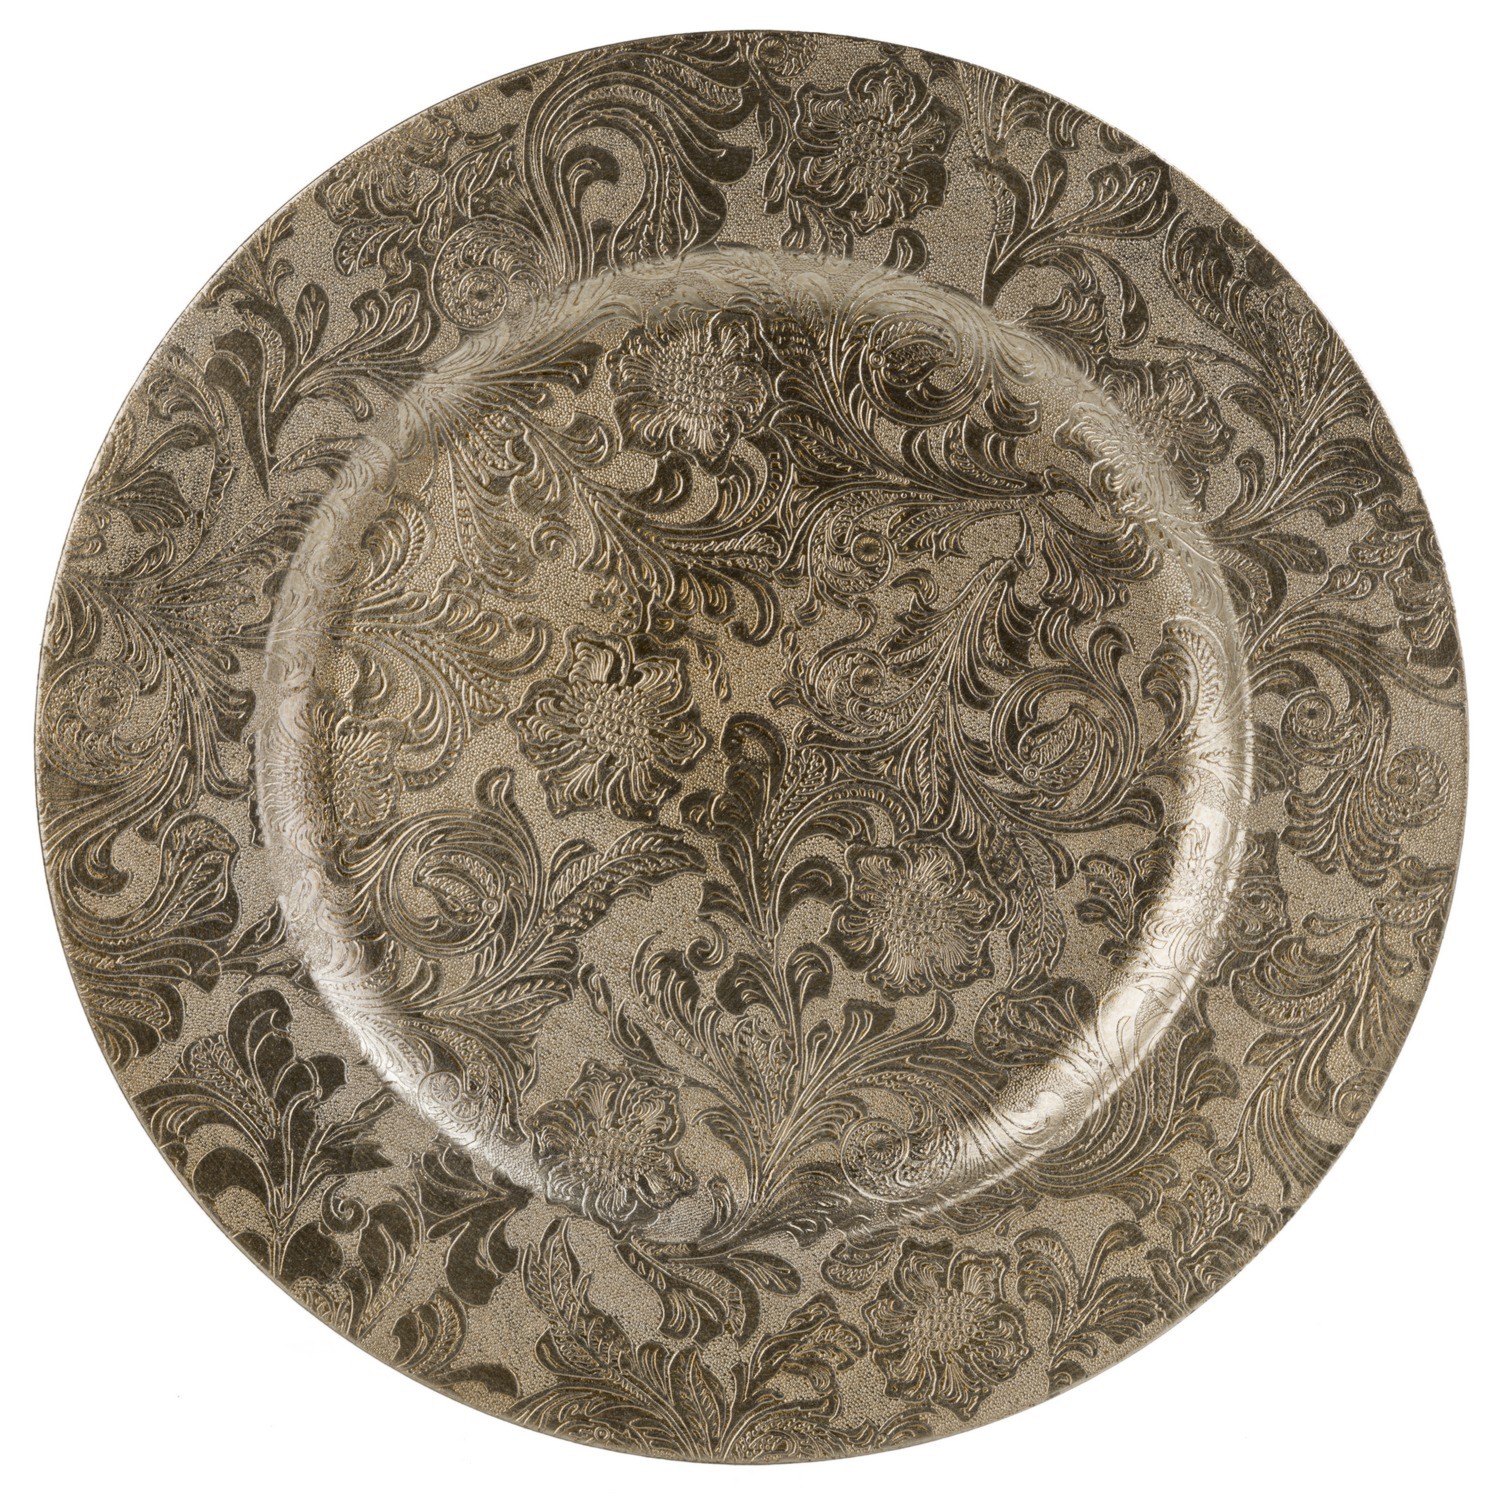 Antique Swirled Plate - Champagne Image